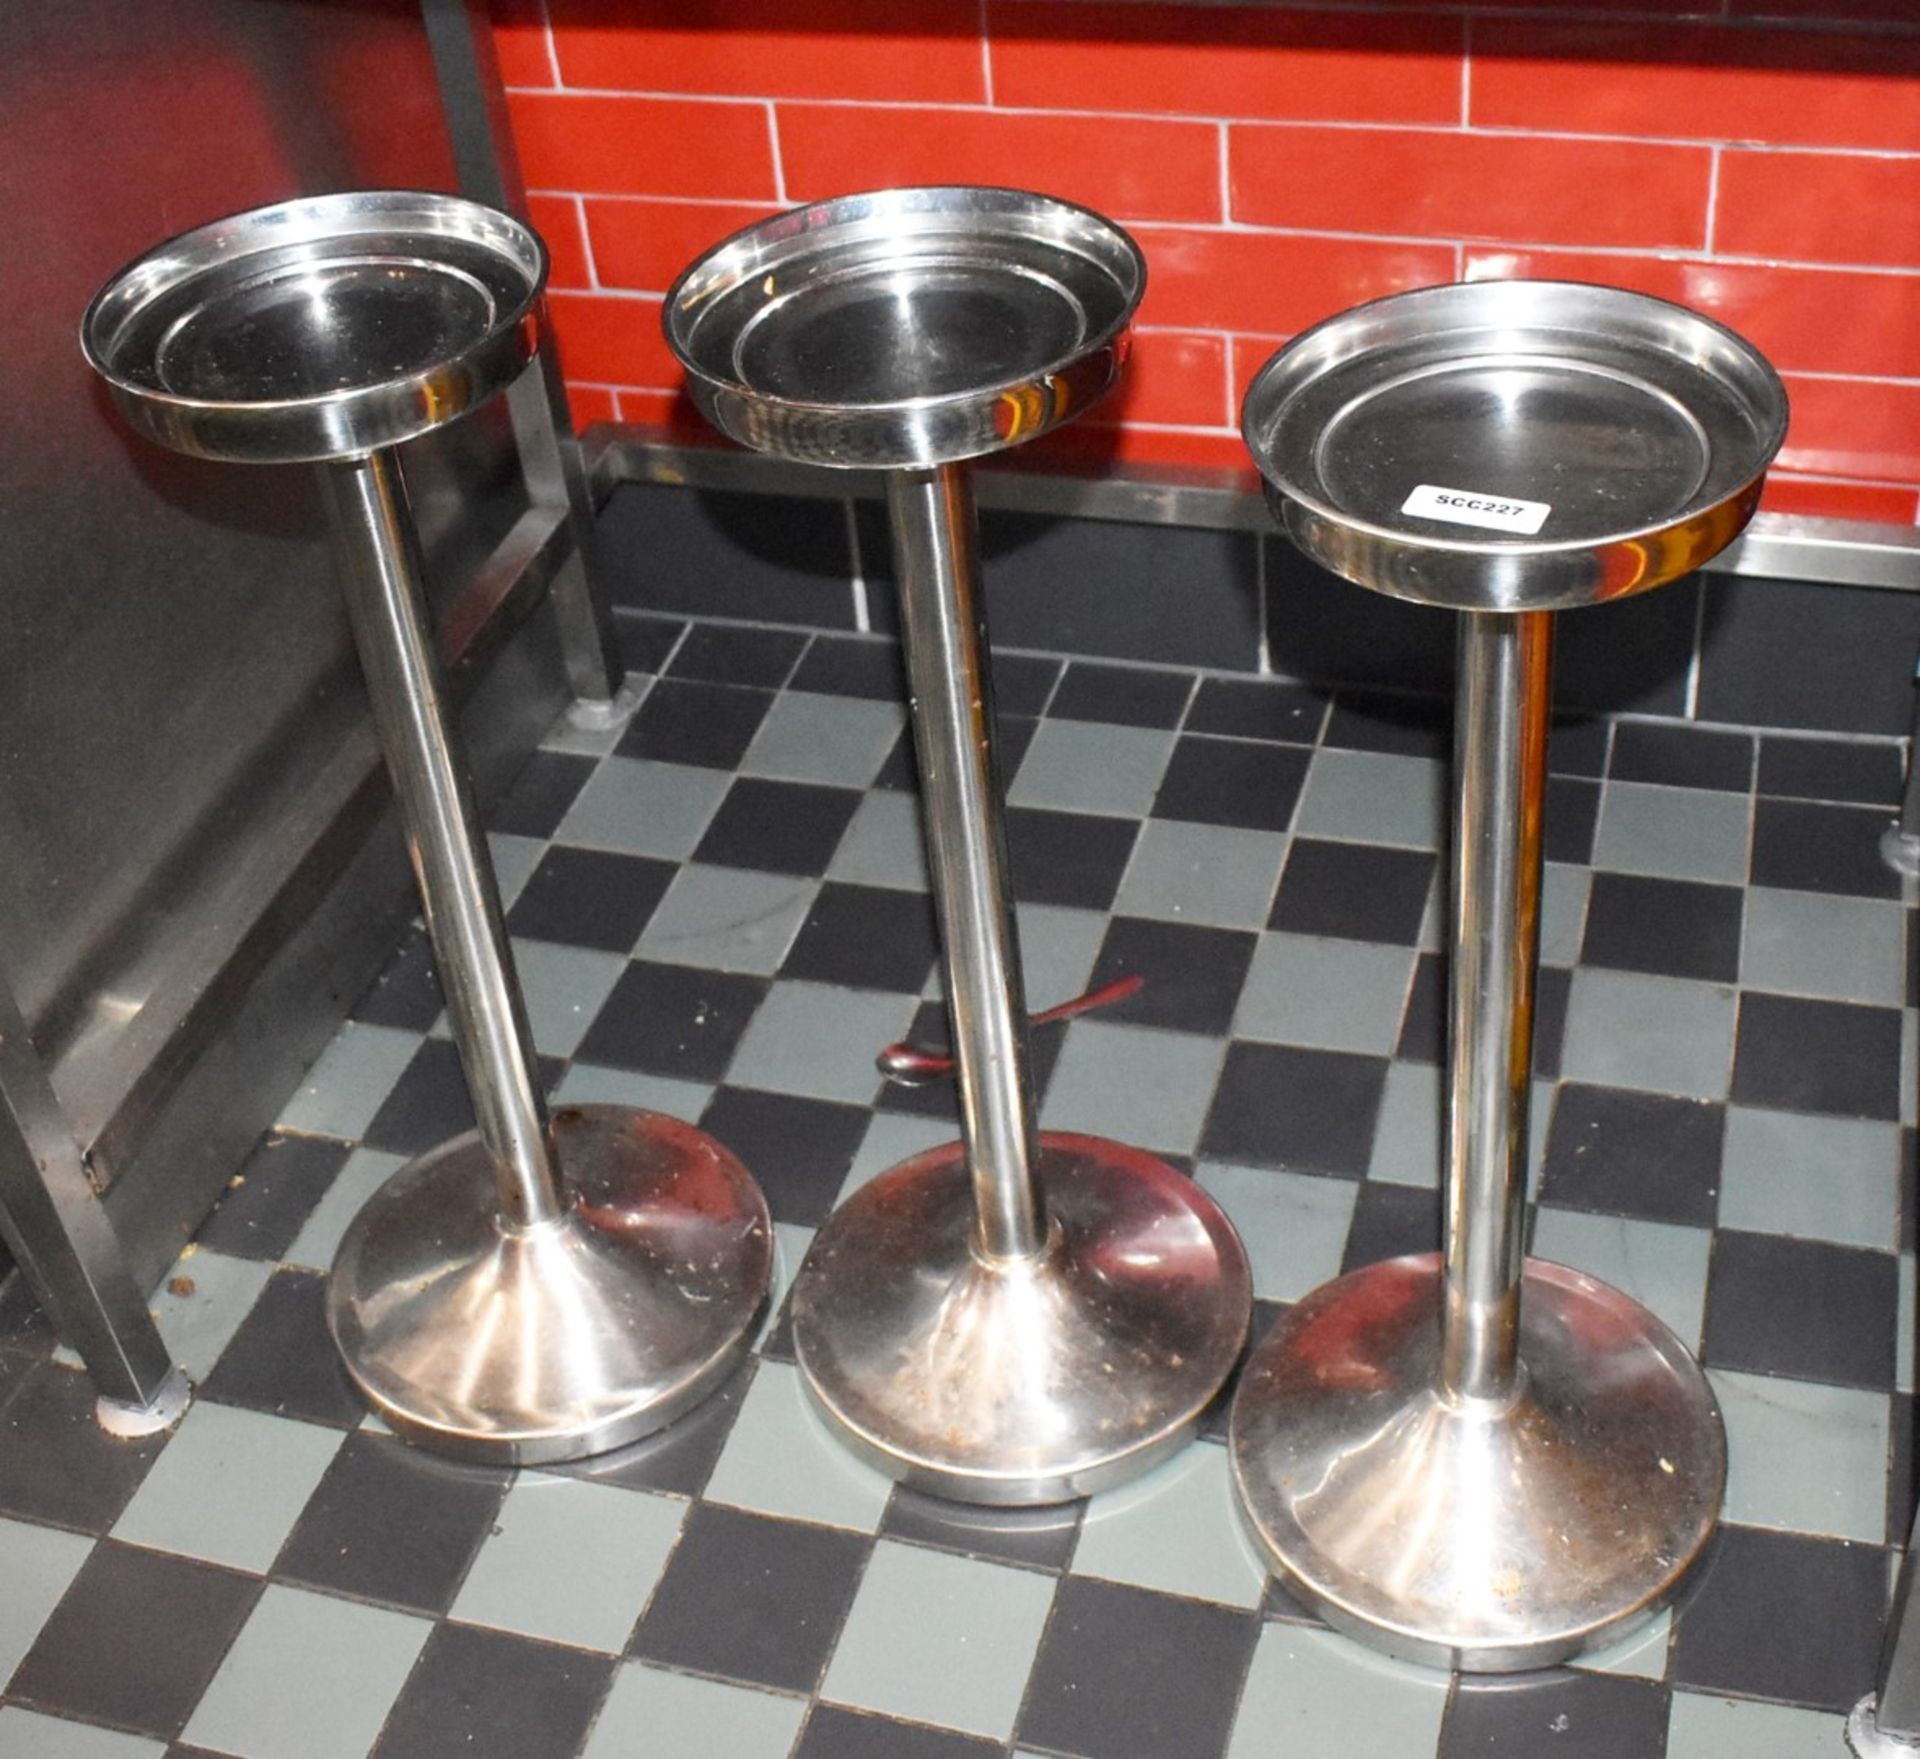 3 x Ice Bucket Stands With Chrome Finish - From a Popular American Diner - Image 2 of 2